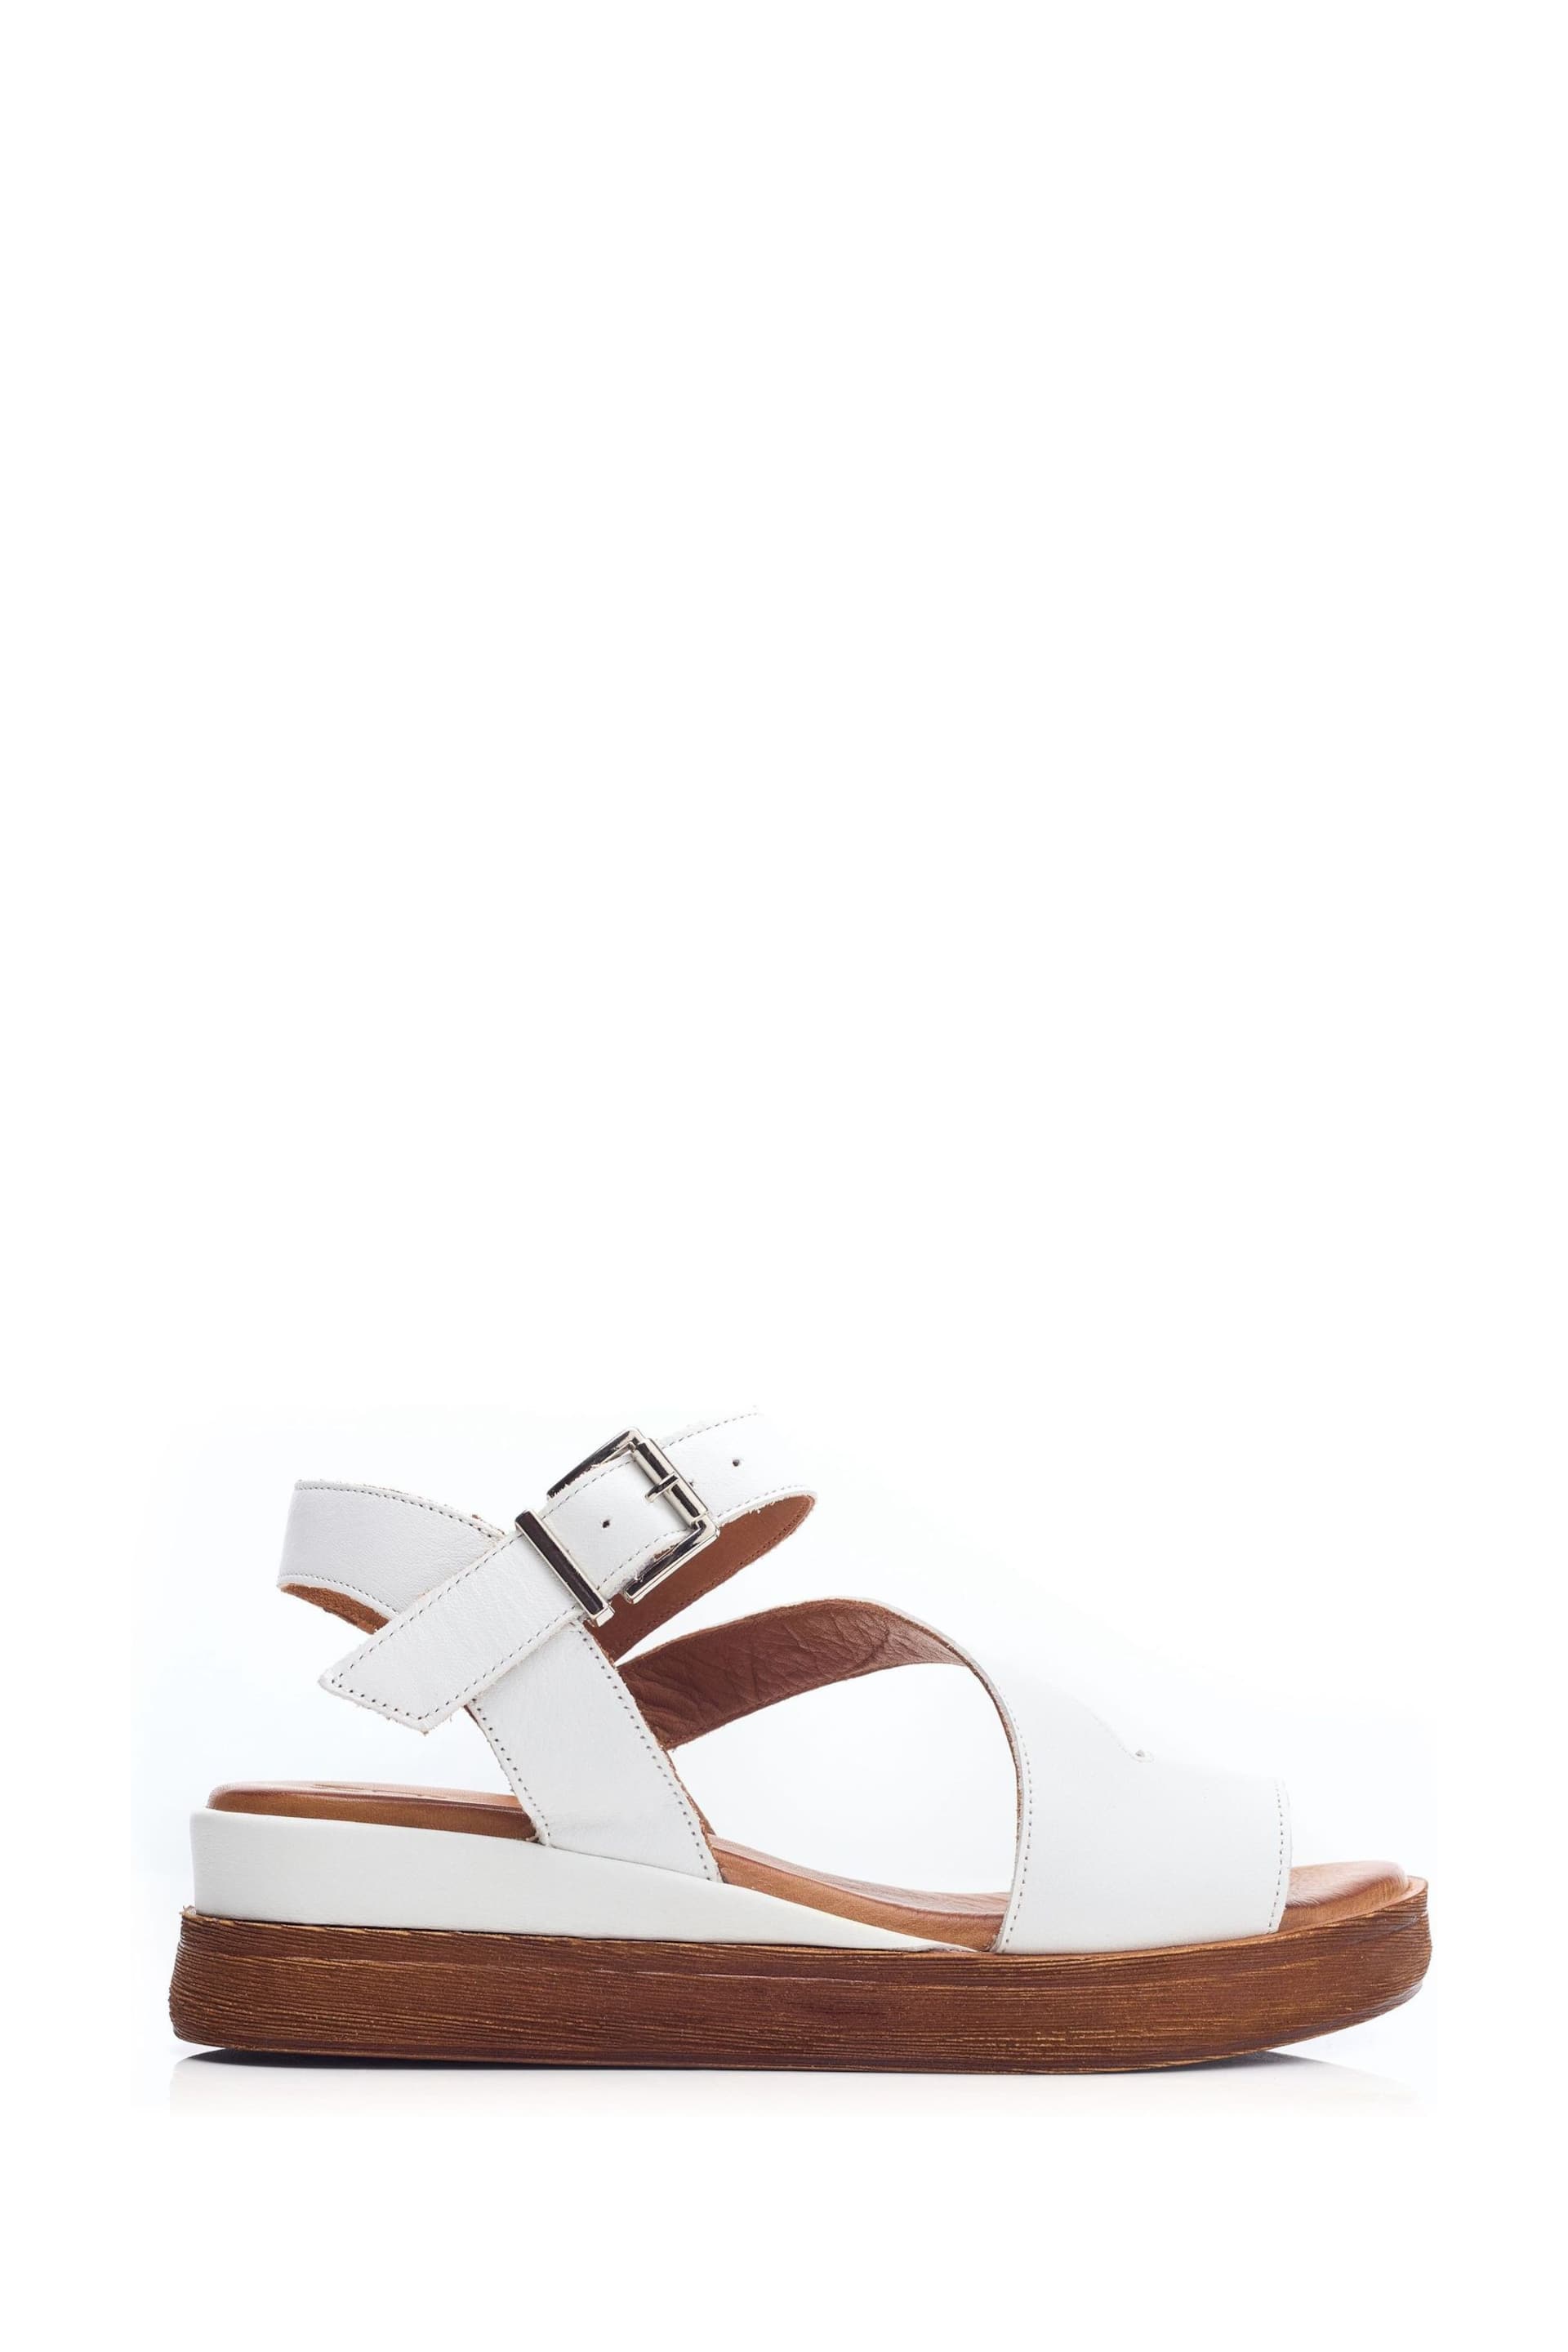 Moda in Pelle Palmers Asymetric Low Wedges - Image 1 of 4